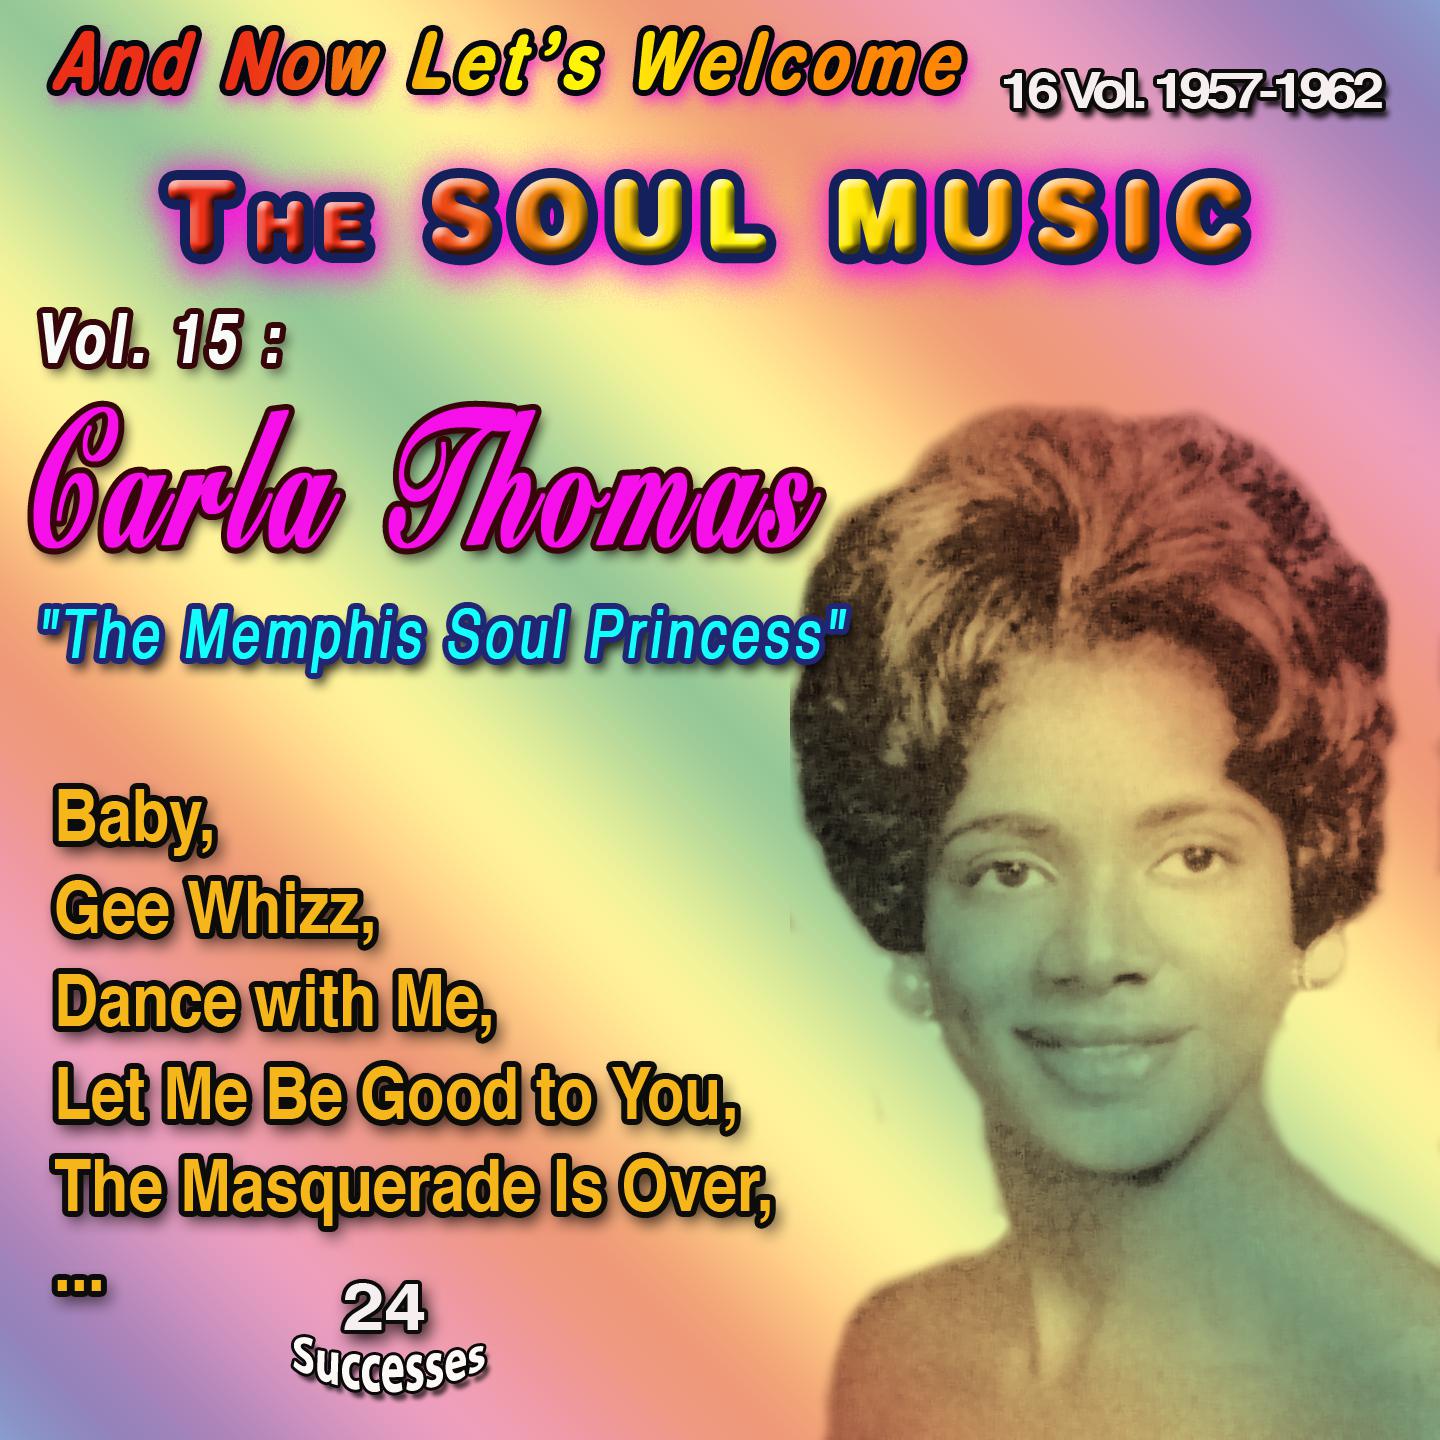 Постер альбома And Now Let's Welcome The Soul Music 16 Vol. 1957-1962 Vol. 15: Carla Thomas "The Memphis Soul Princess"